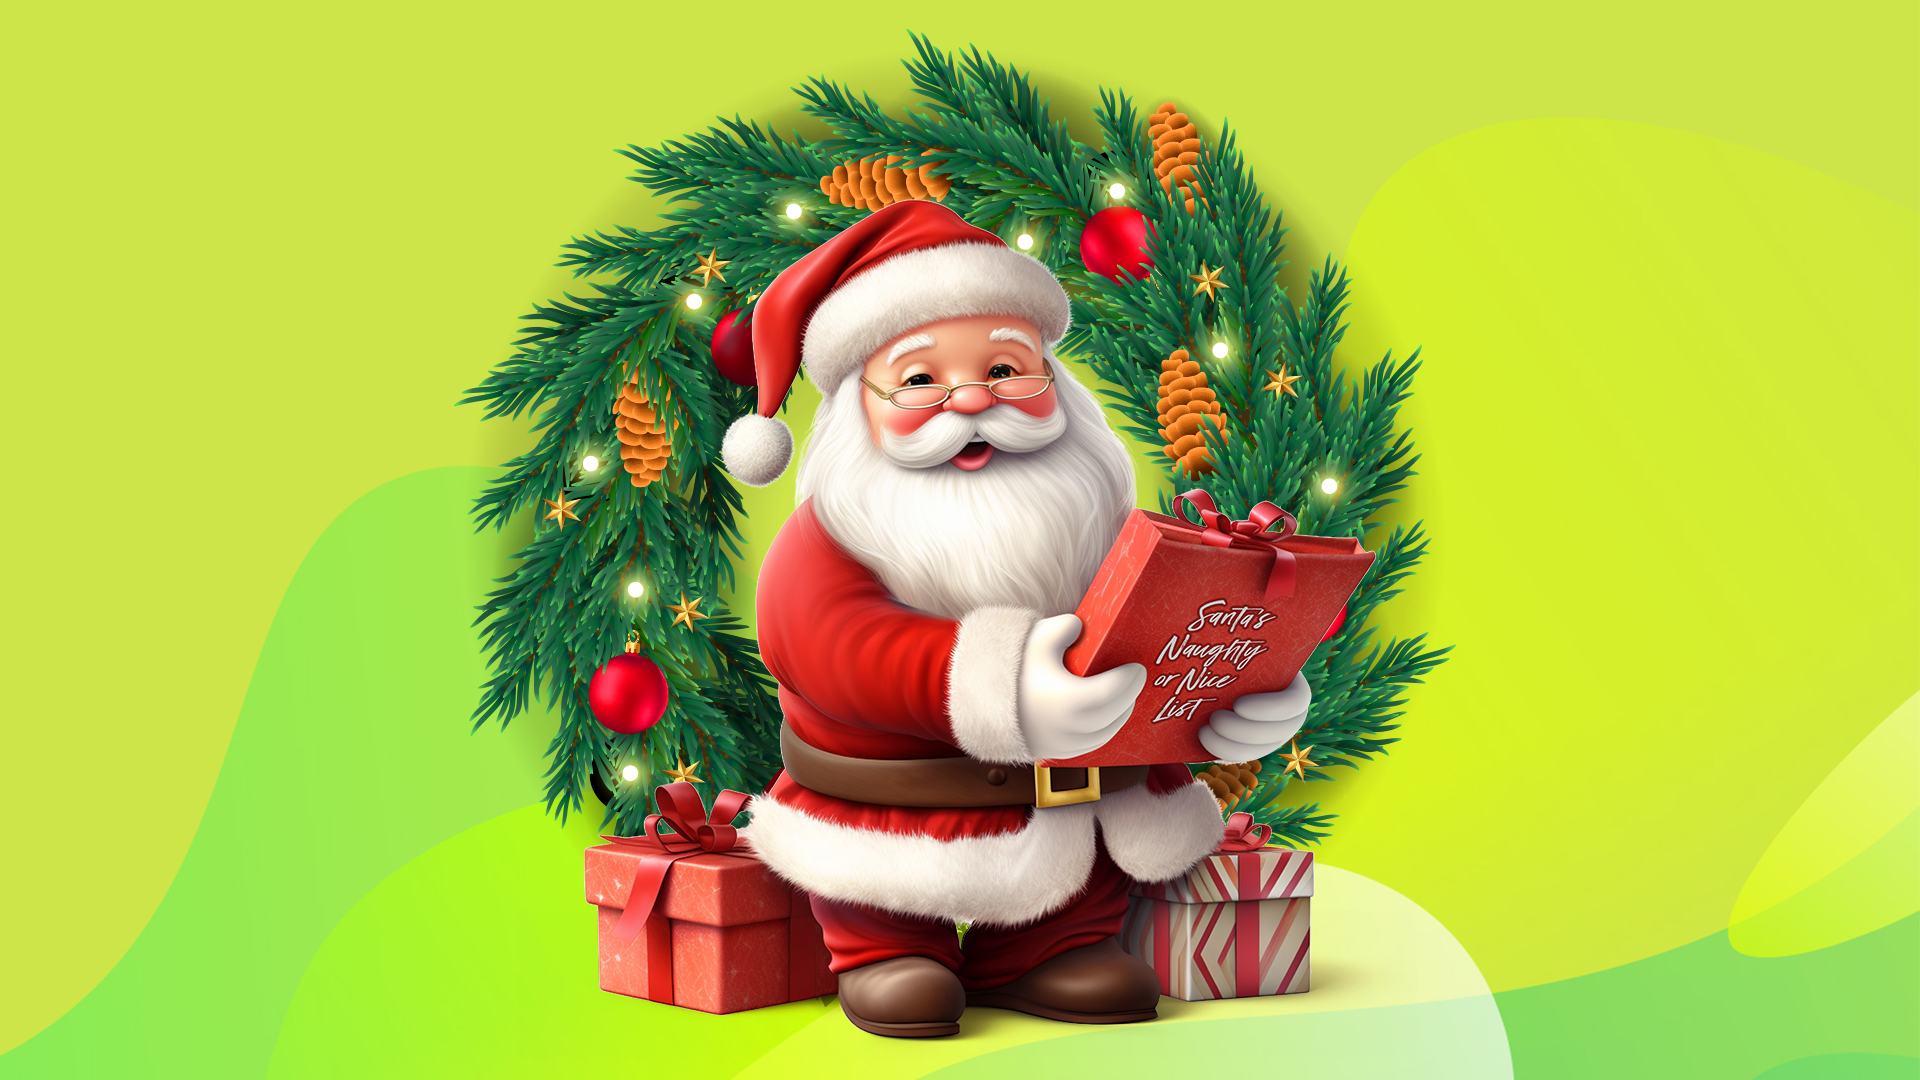 Illustrated Santa standing in front of a Christmas wreath and presents against a green background.